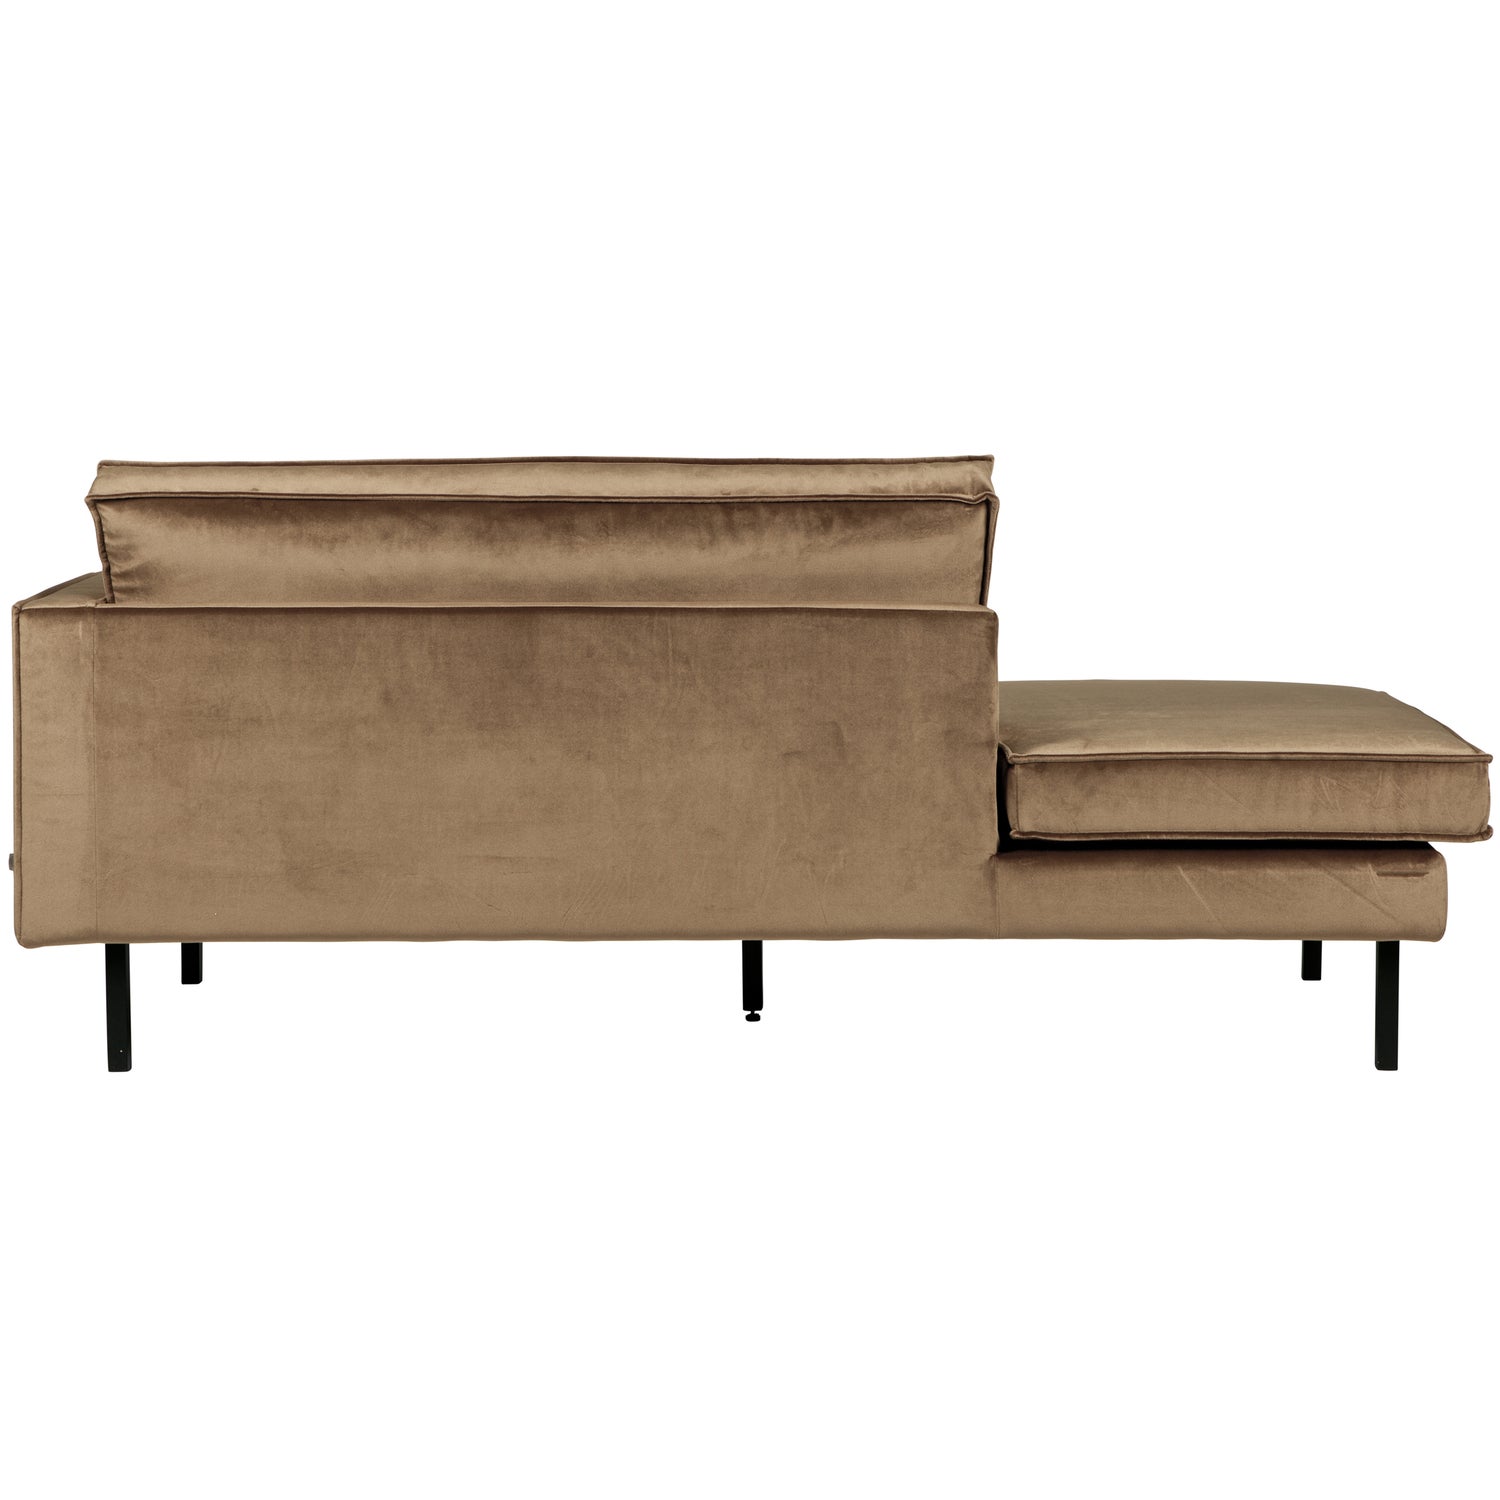 800746-12-03_VS_BL_Rodeo_daybed_right_taupe_AK1.jpg?auto=webp&format=png&width=2000&height=2000